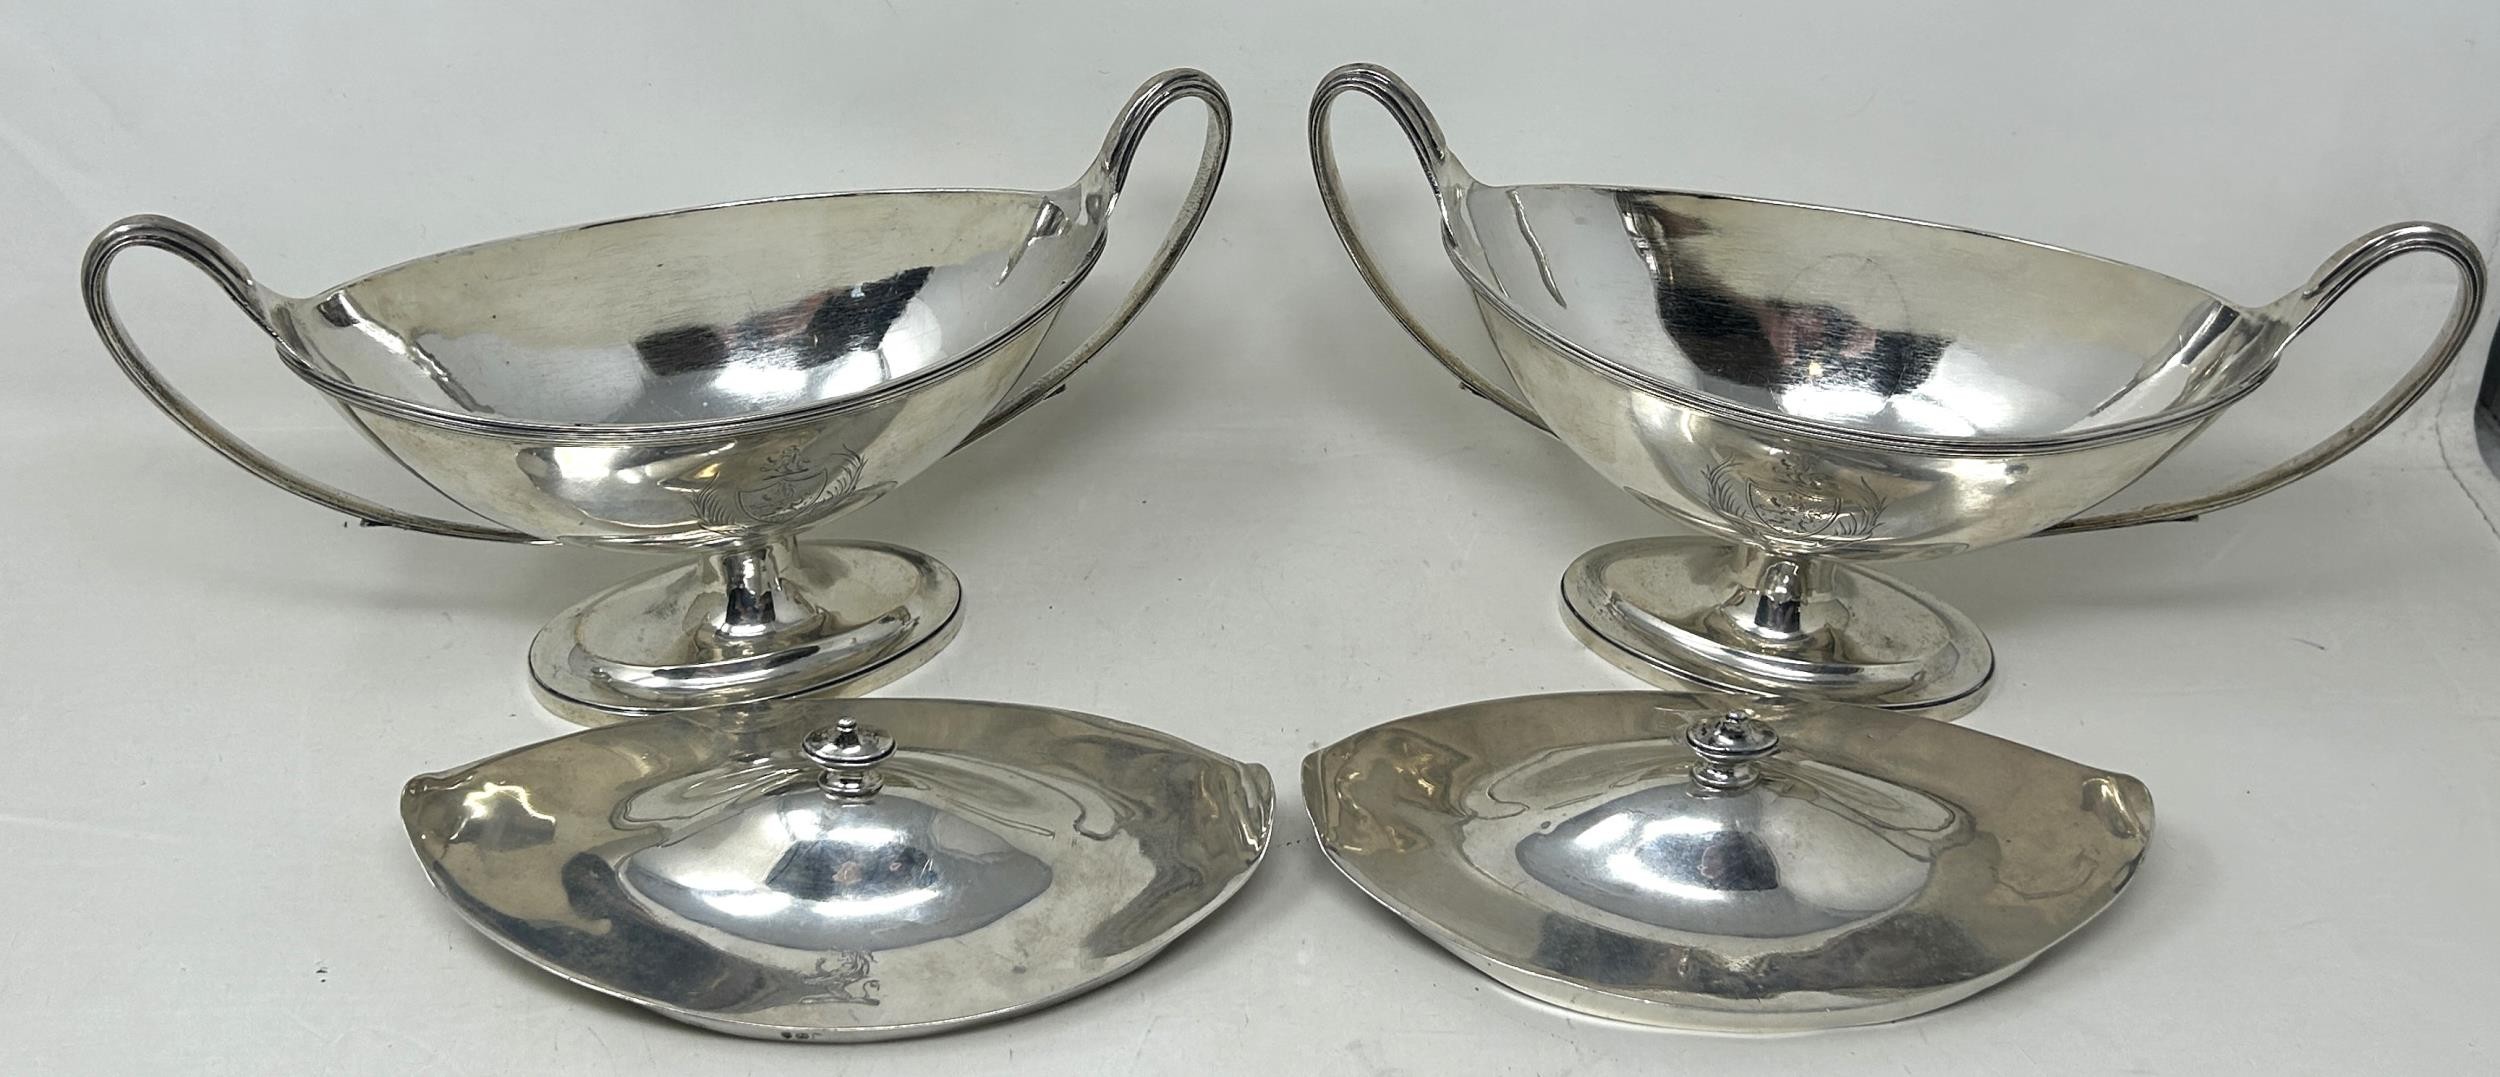 A pair of George III silver tureens and covers, of navette form, London 1791, 36.9 ozt (2) - Image 8 of 12